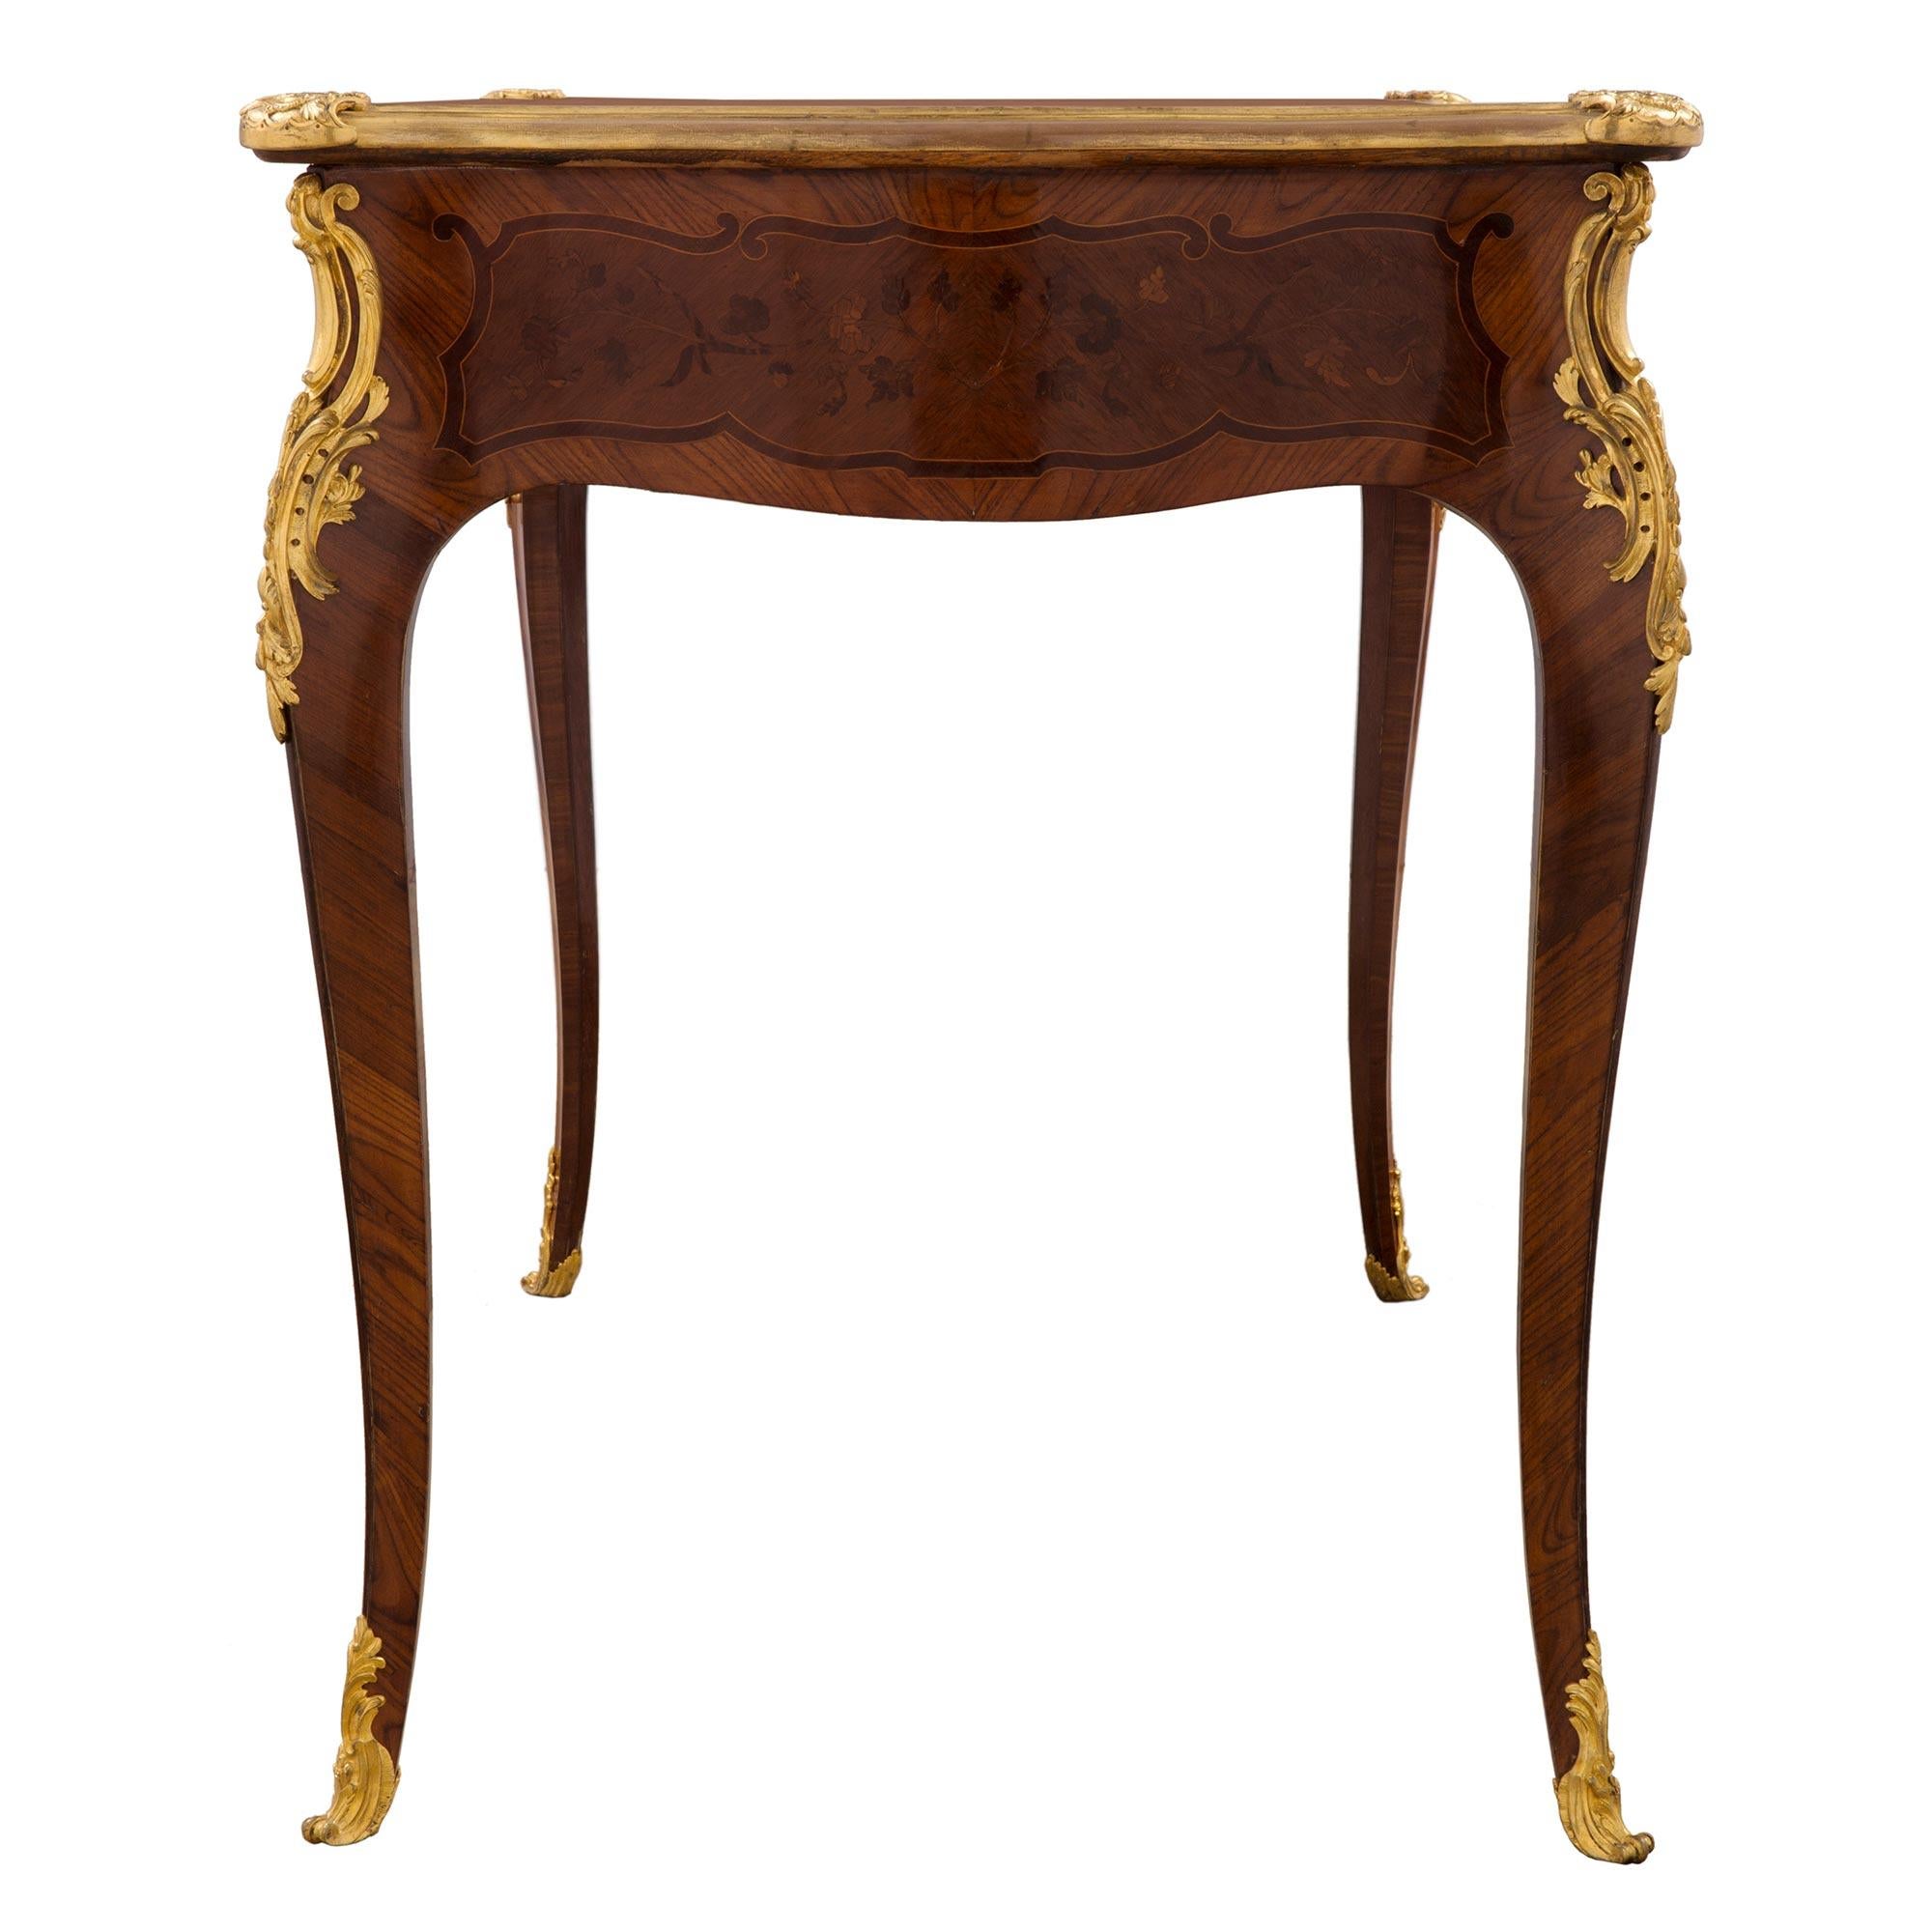 French 19th Century Louis XV Style Kingwood, Tulipwood, Ormolu and Leather Desk For Sale 2